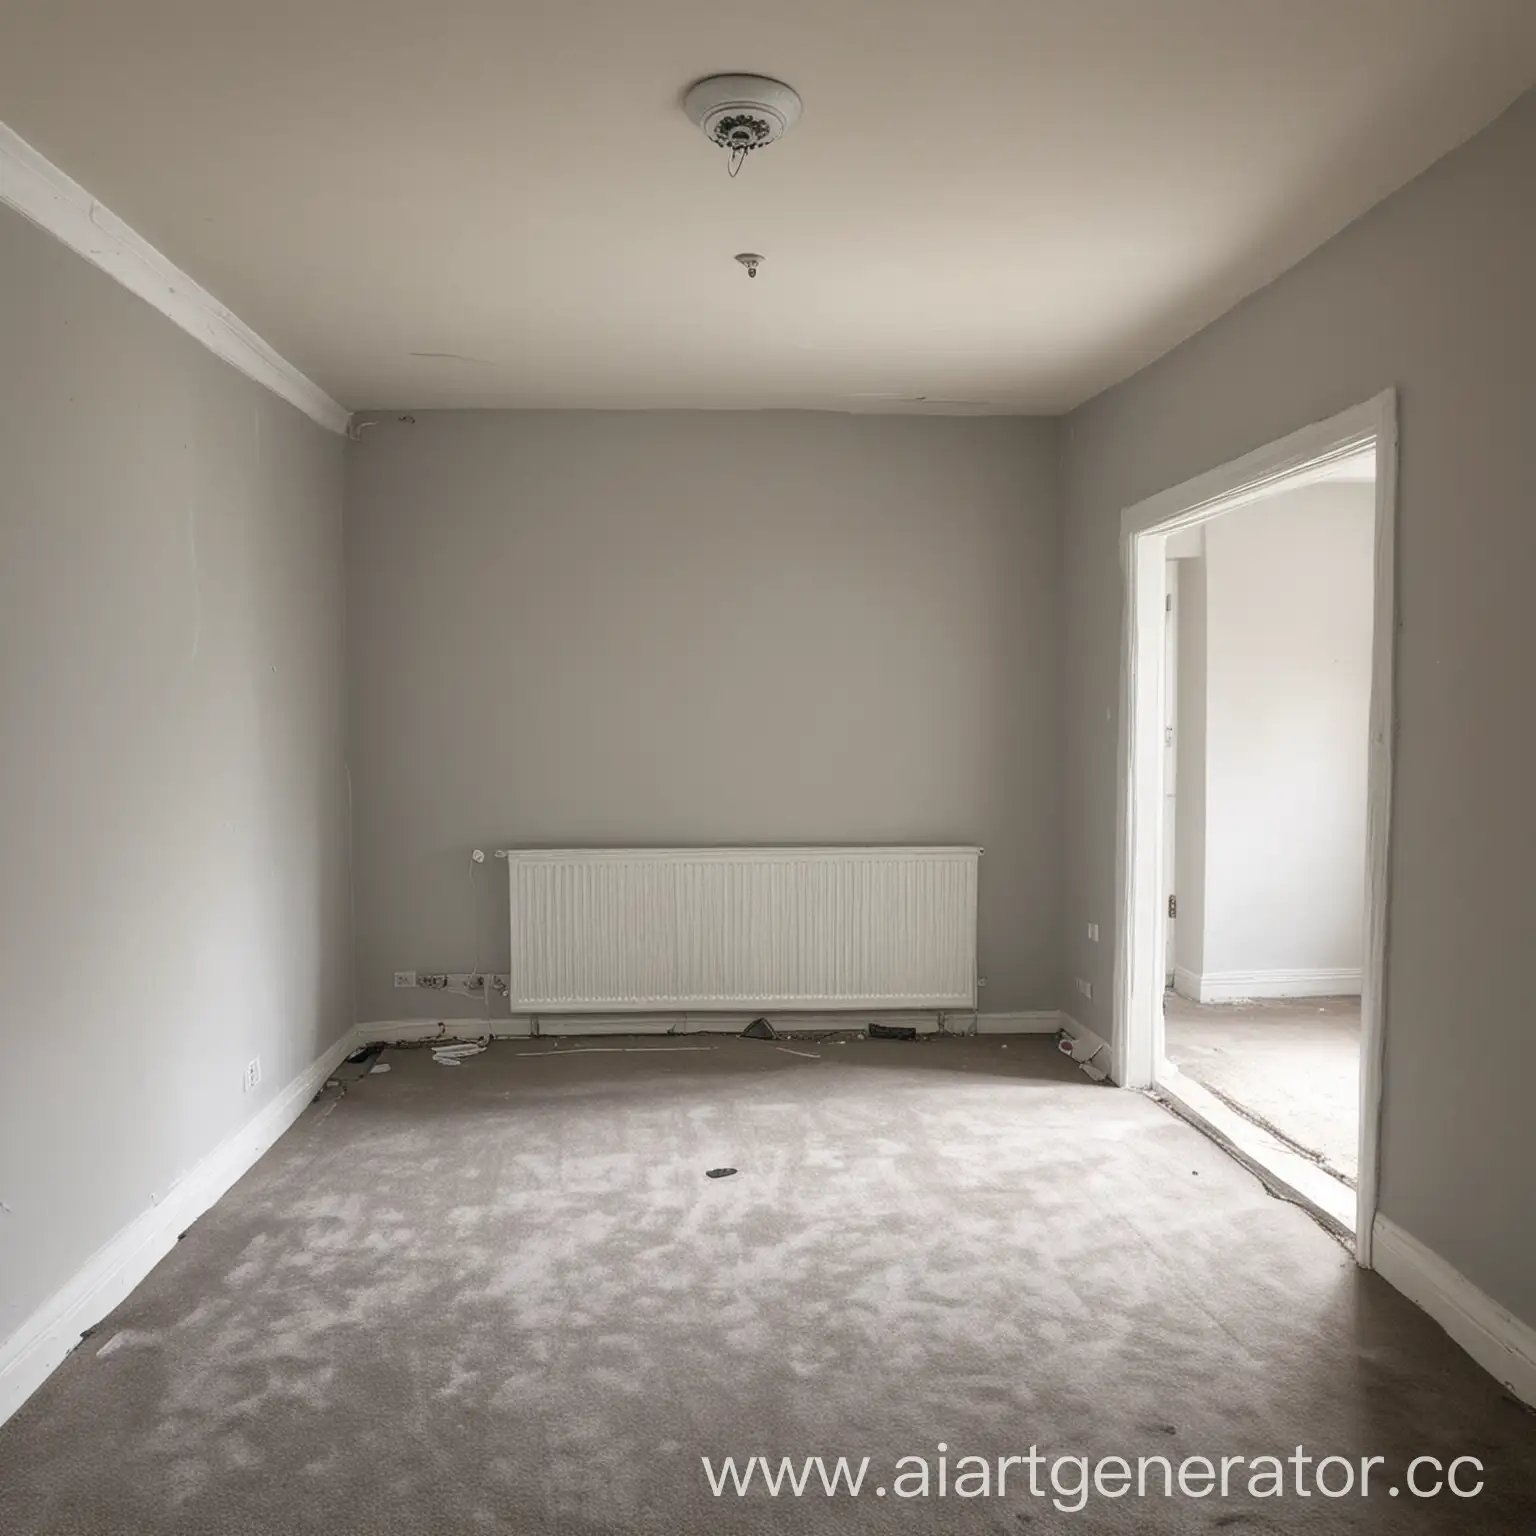 Empty-Room-with-Window-and-Door-Gray-and-White-Color-Scheme-Stretch-Ceiling-and-Builtin-Lights